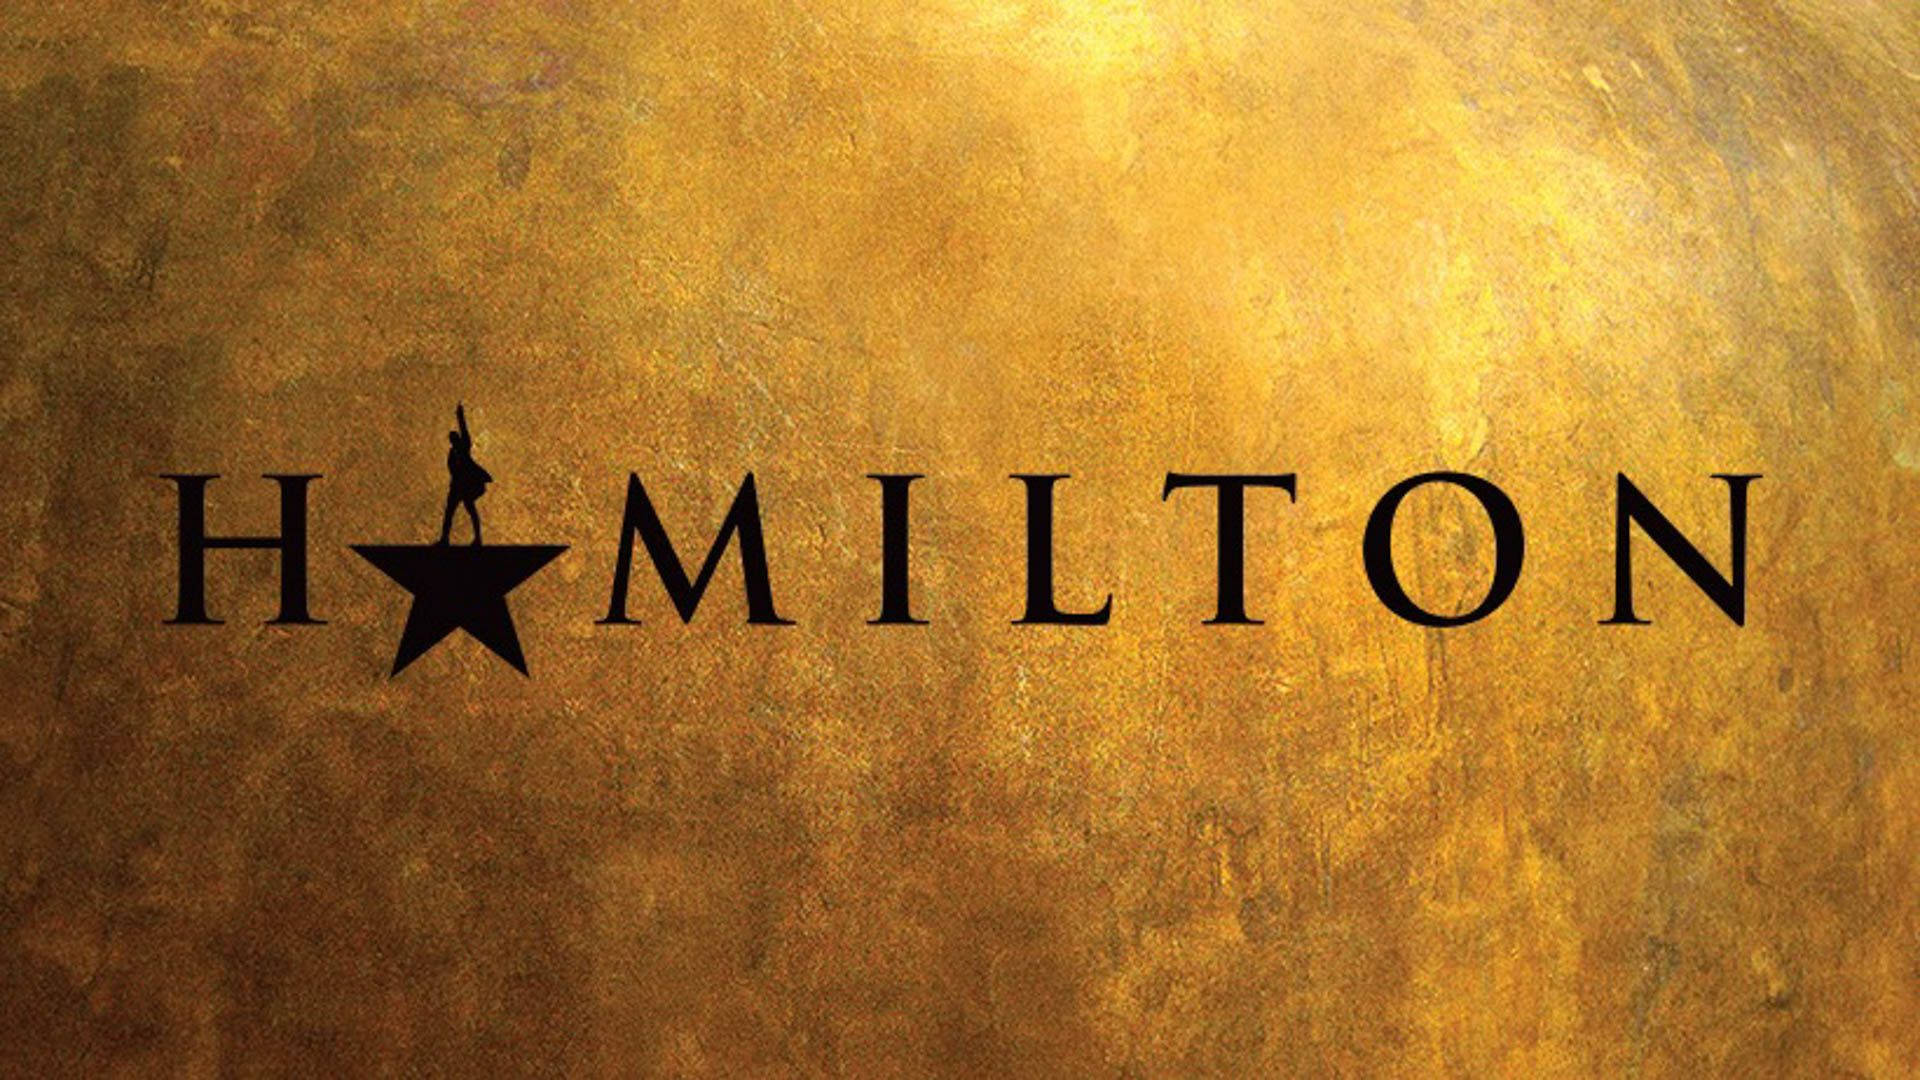 Get to know the real Hamilton Wallpaper